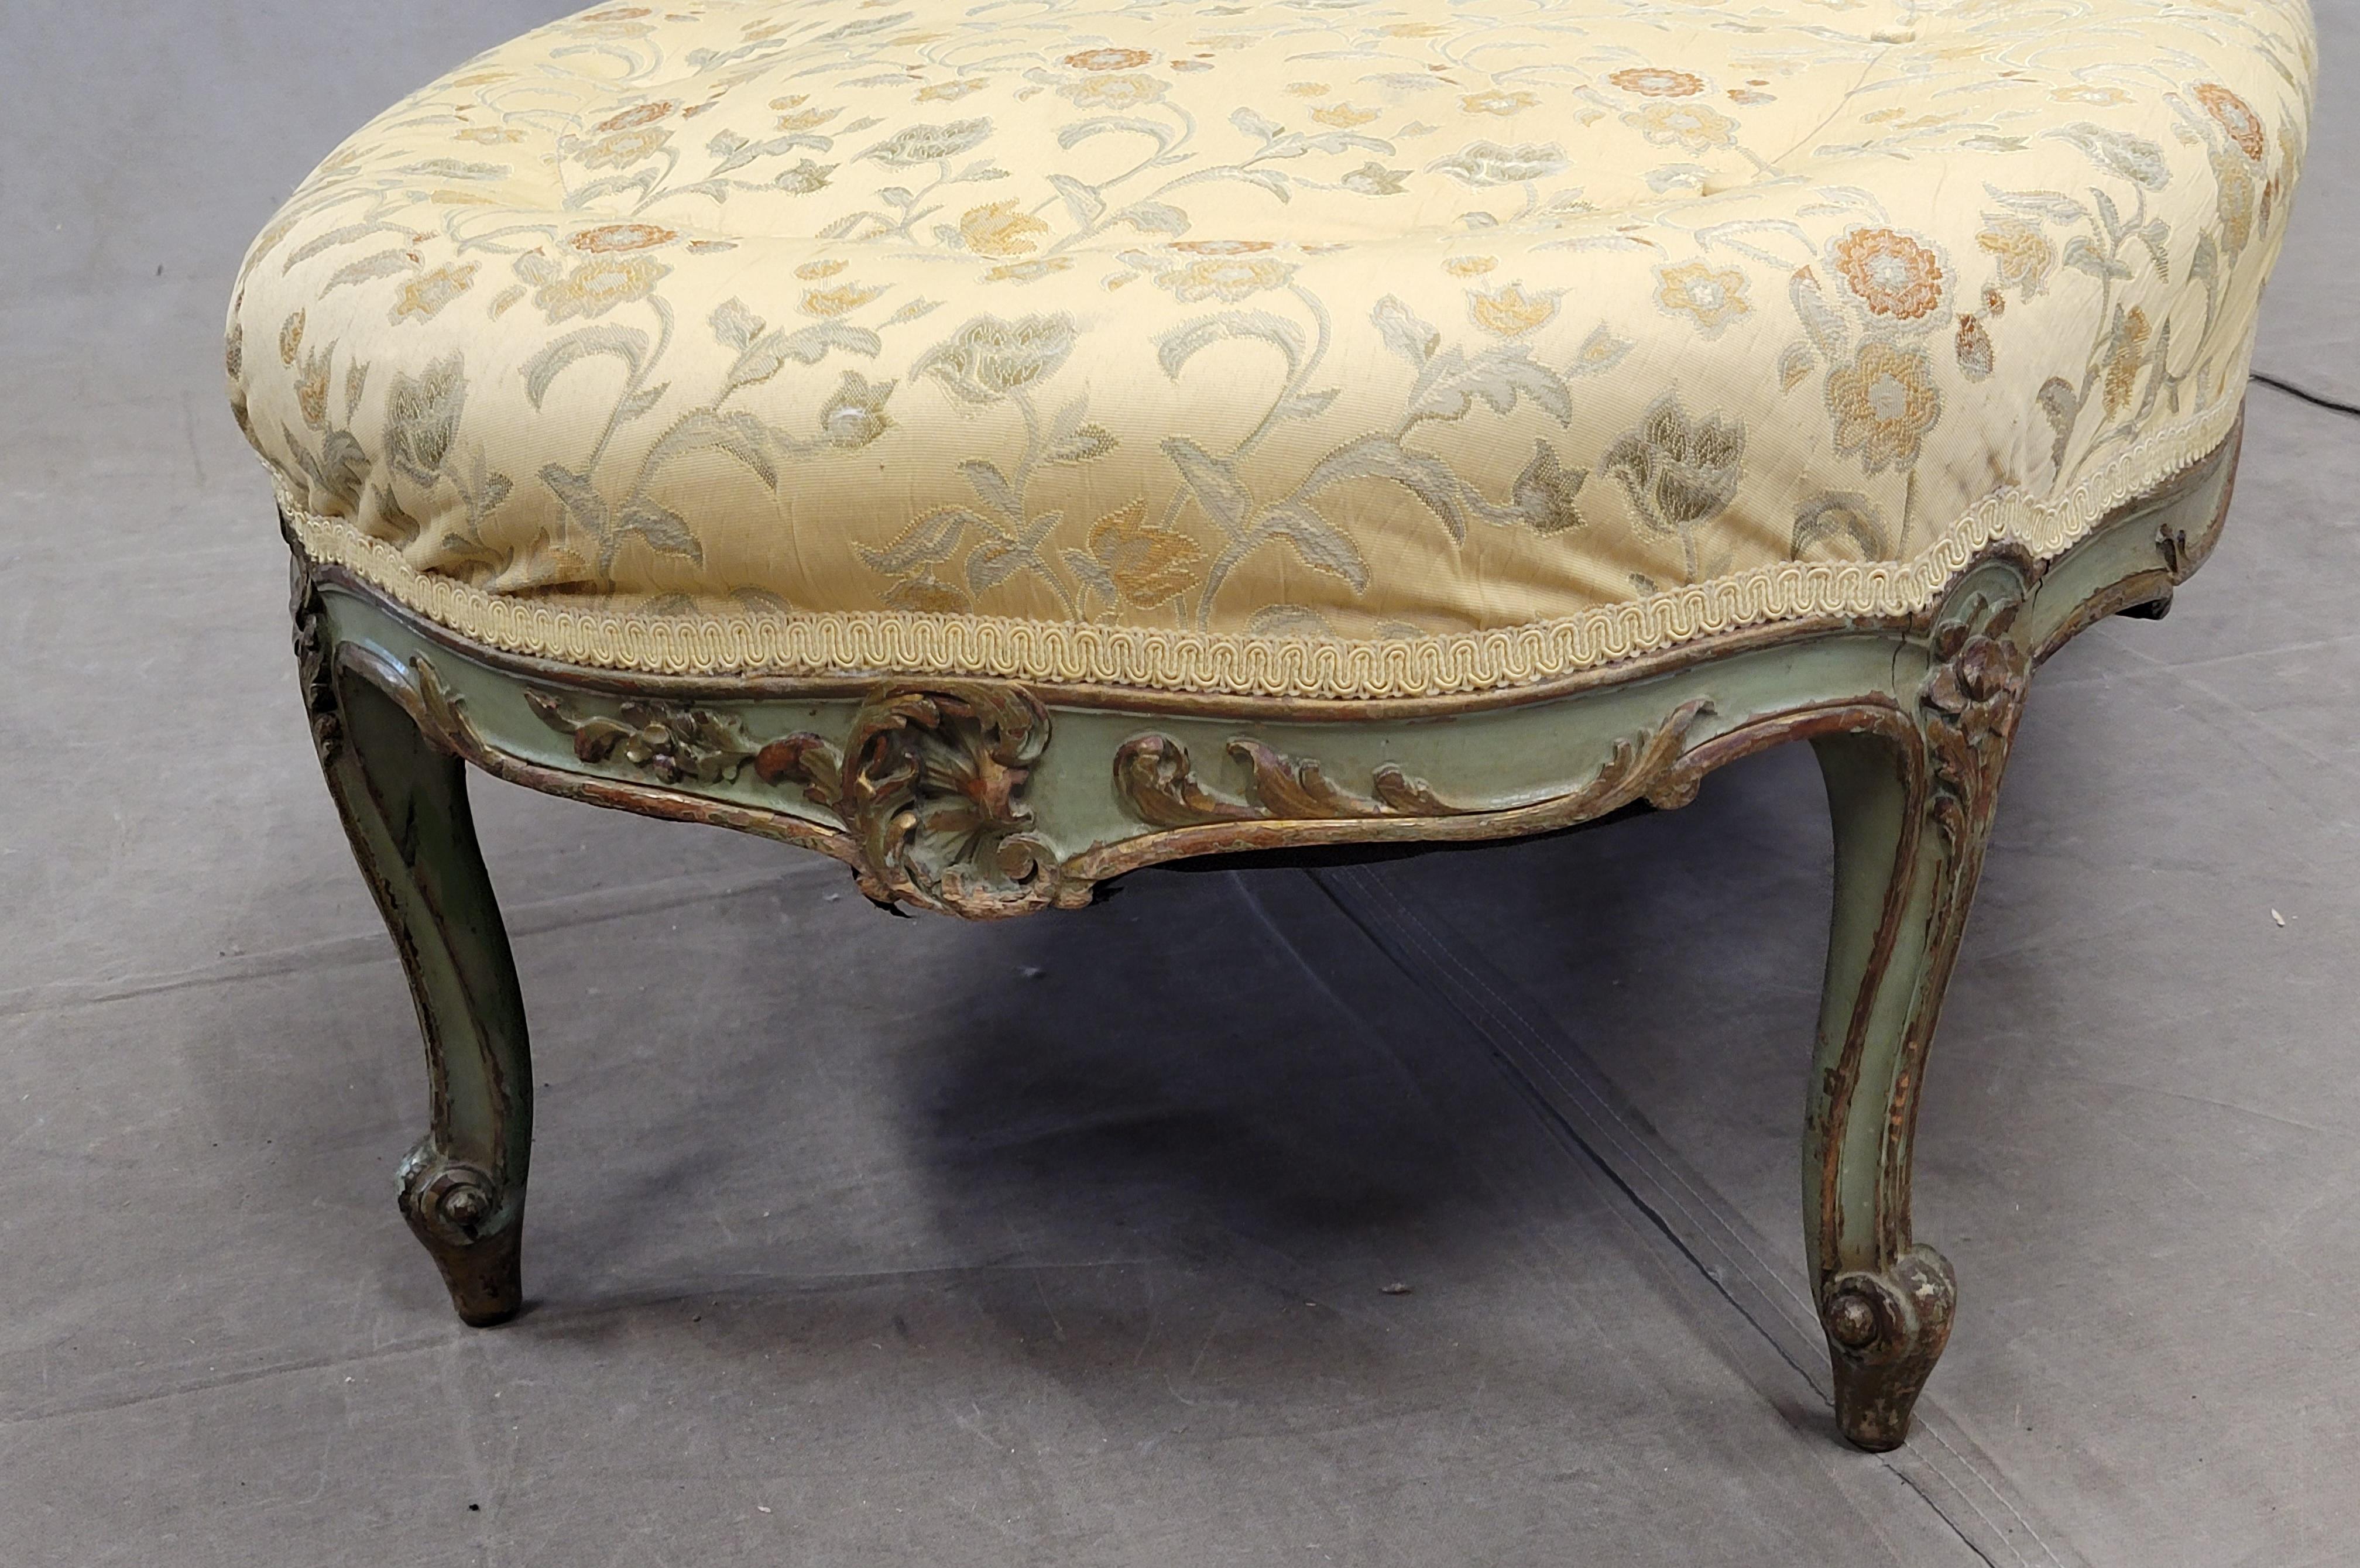 Fabric Antique French Louis XV Style Chaise Lounge with Brocade Upholstery